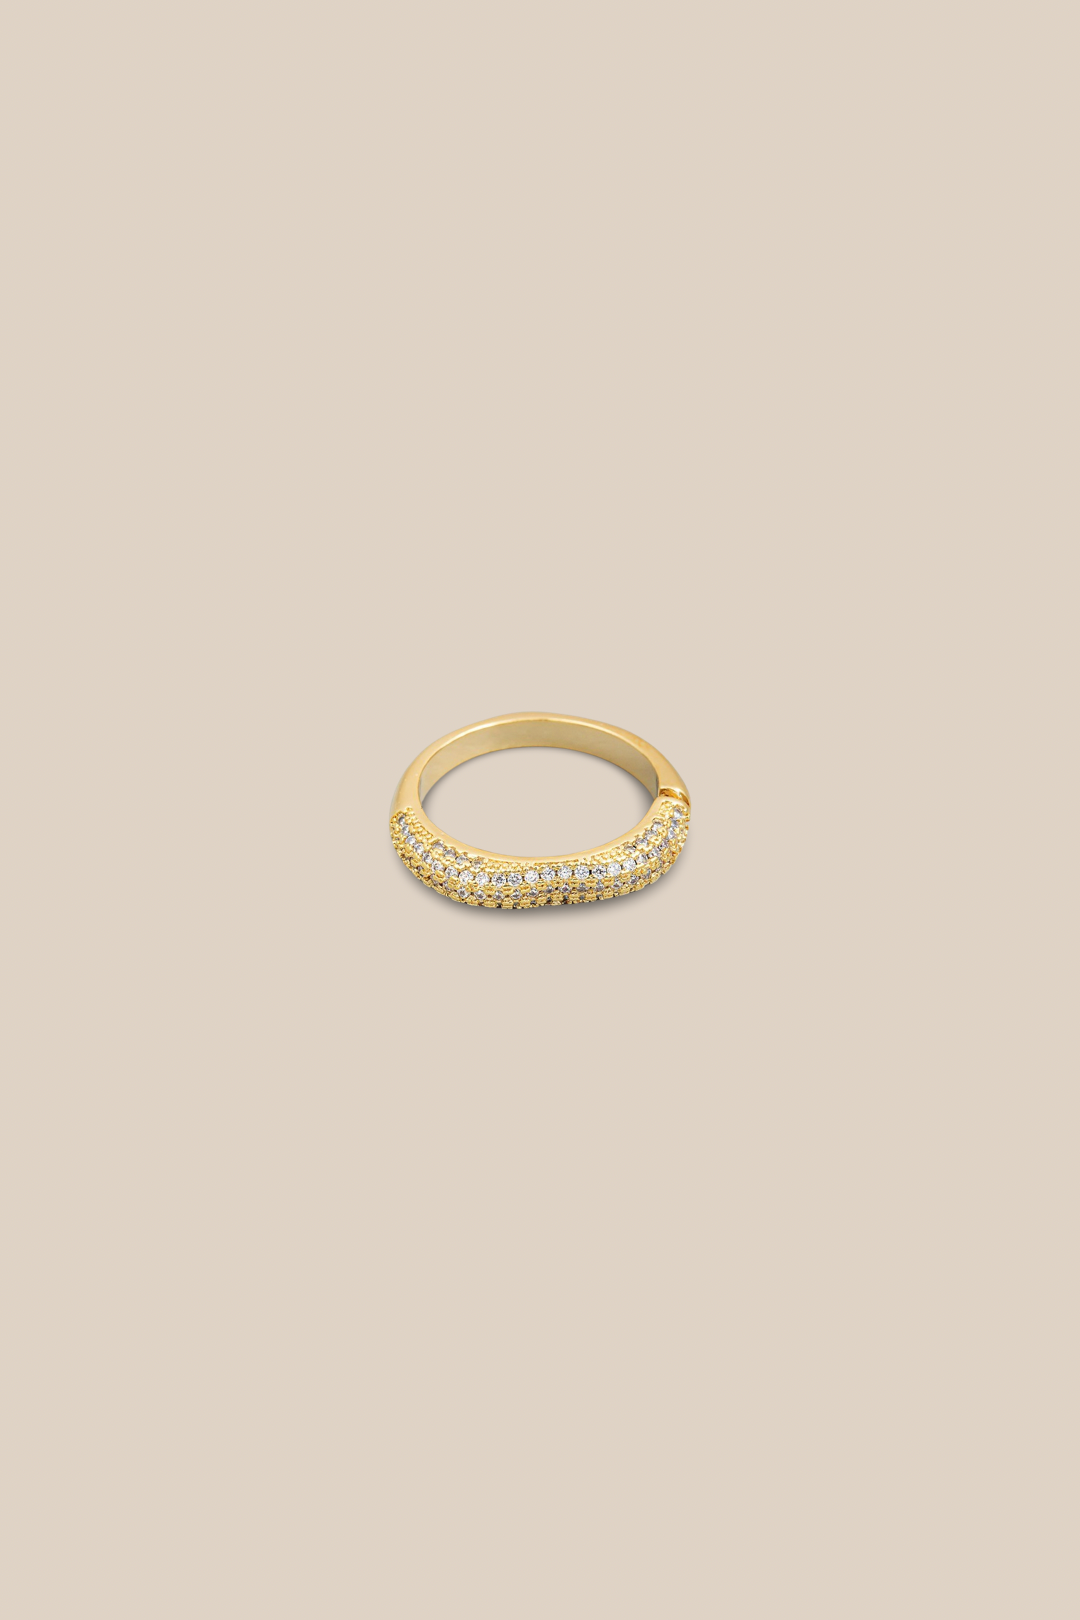 PAVE WAVE RING